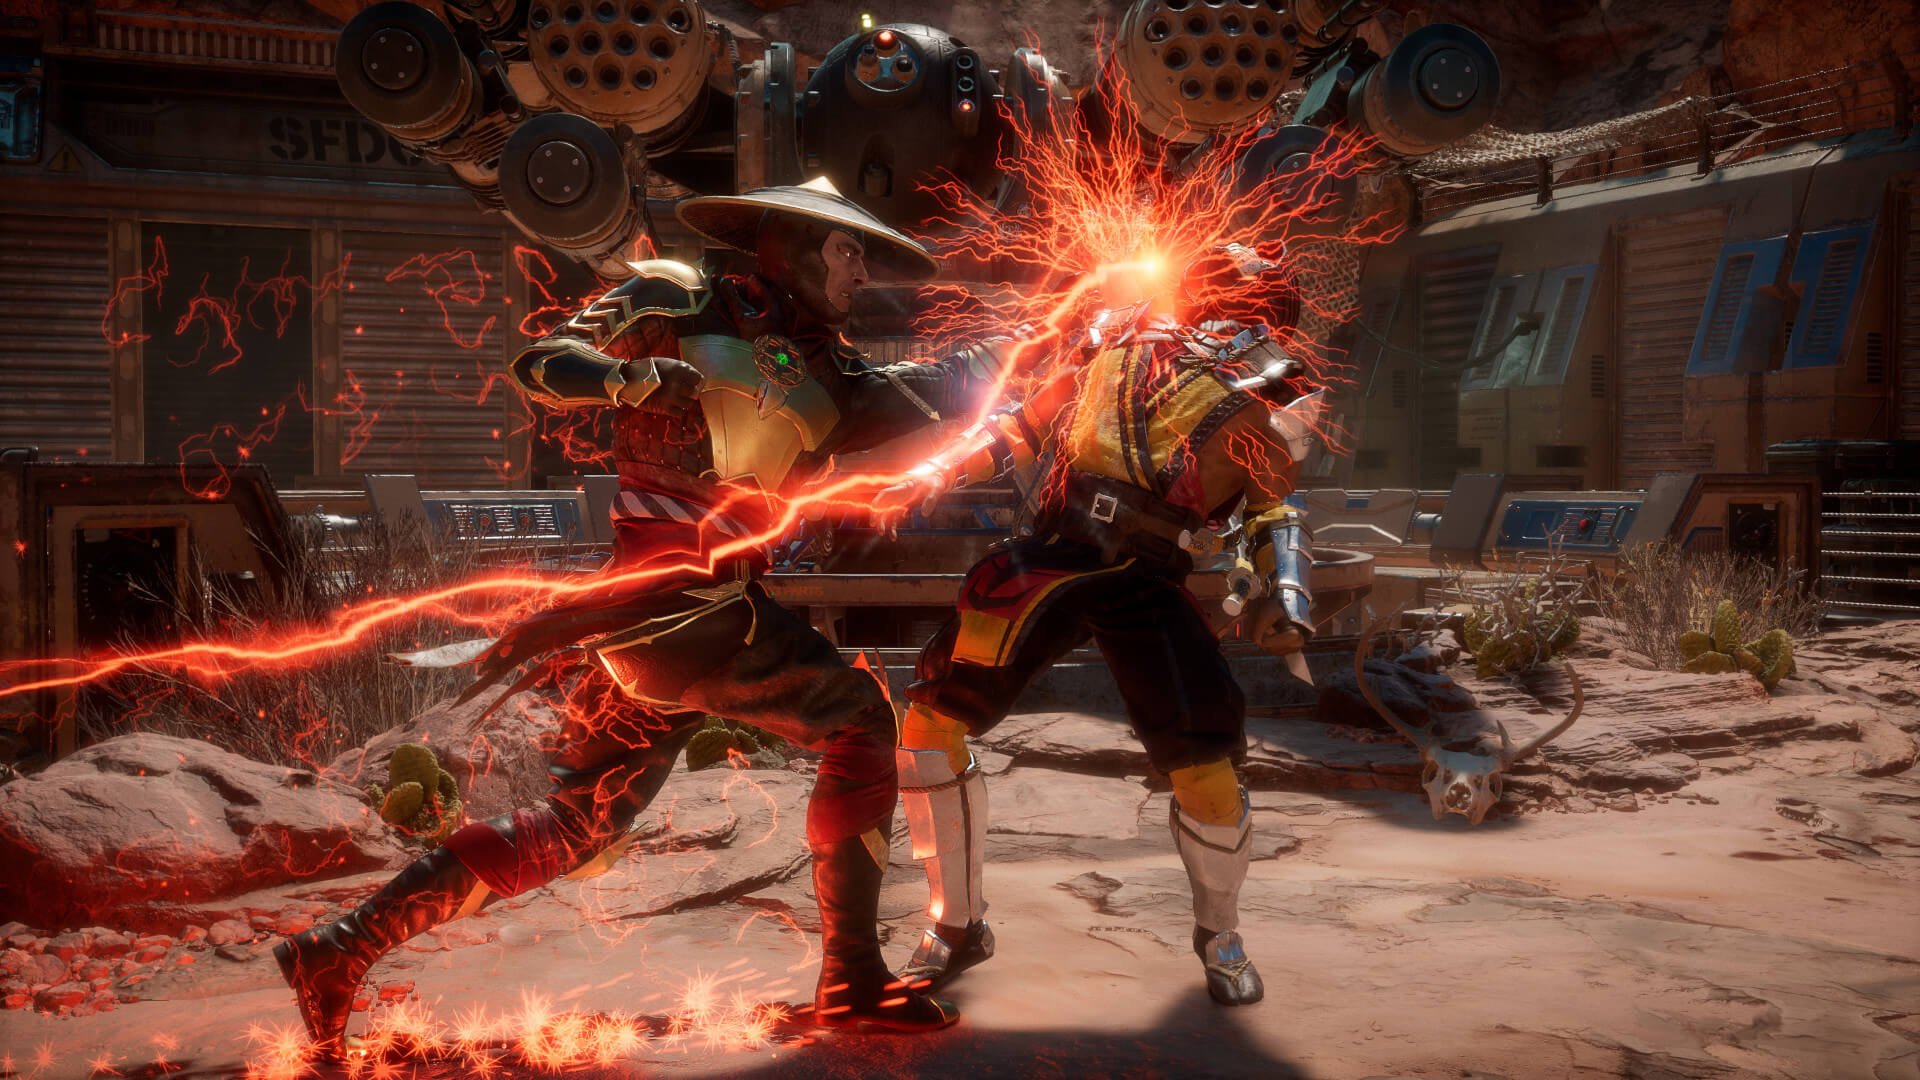 Raiden punching Scorpion in Mortal Kombat 11, the Switch port of which was developed by new Embracer Group acquisition Shiver Entertainment